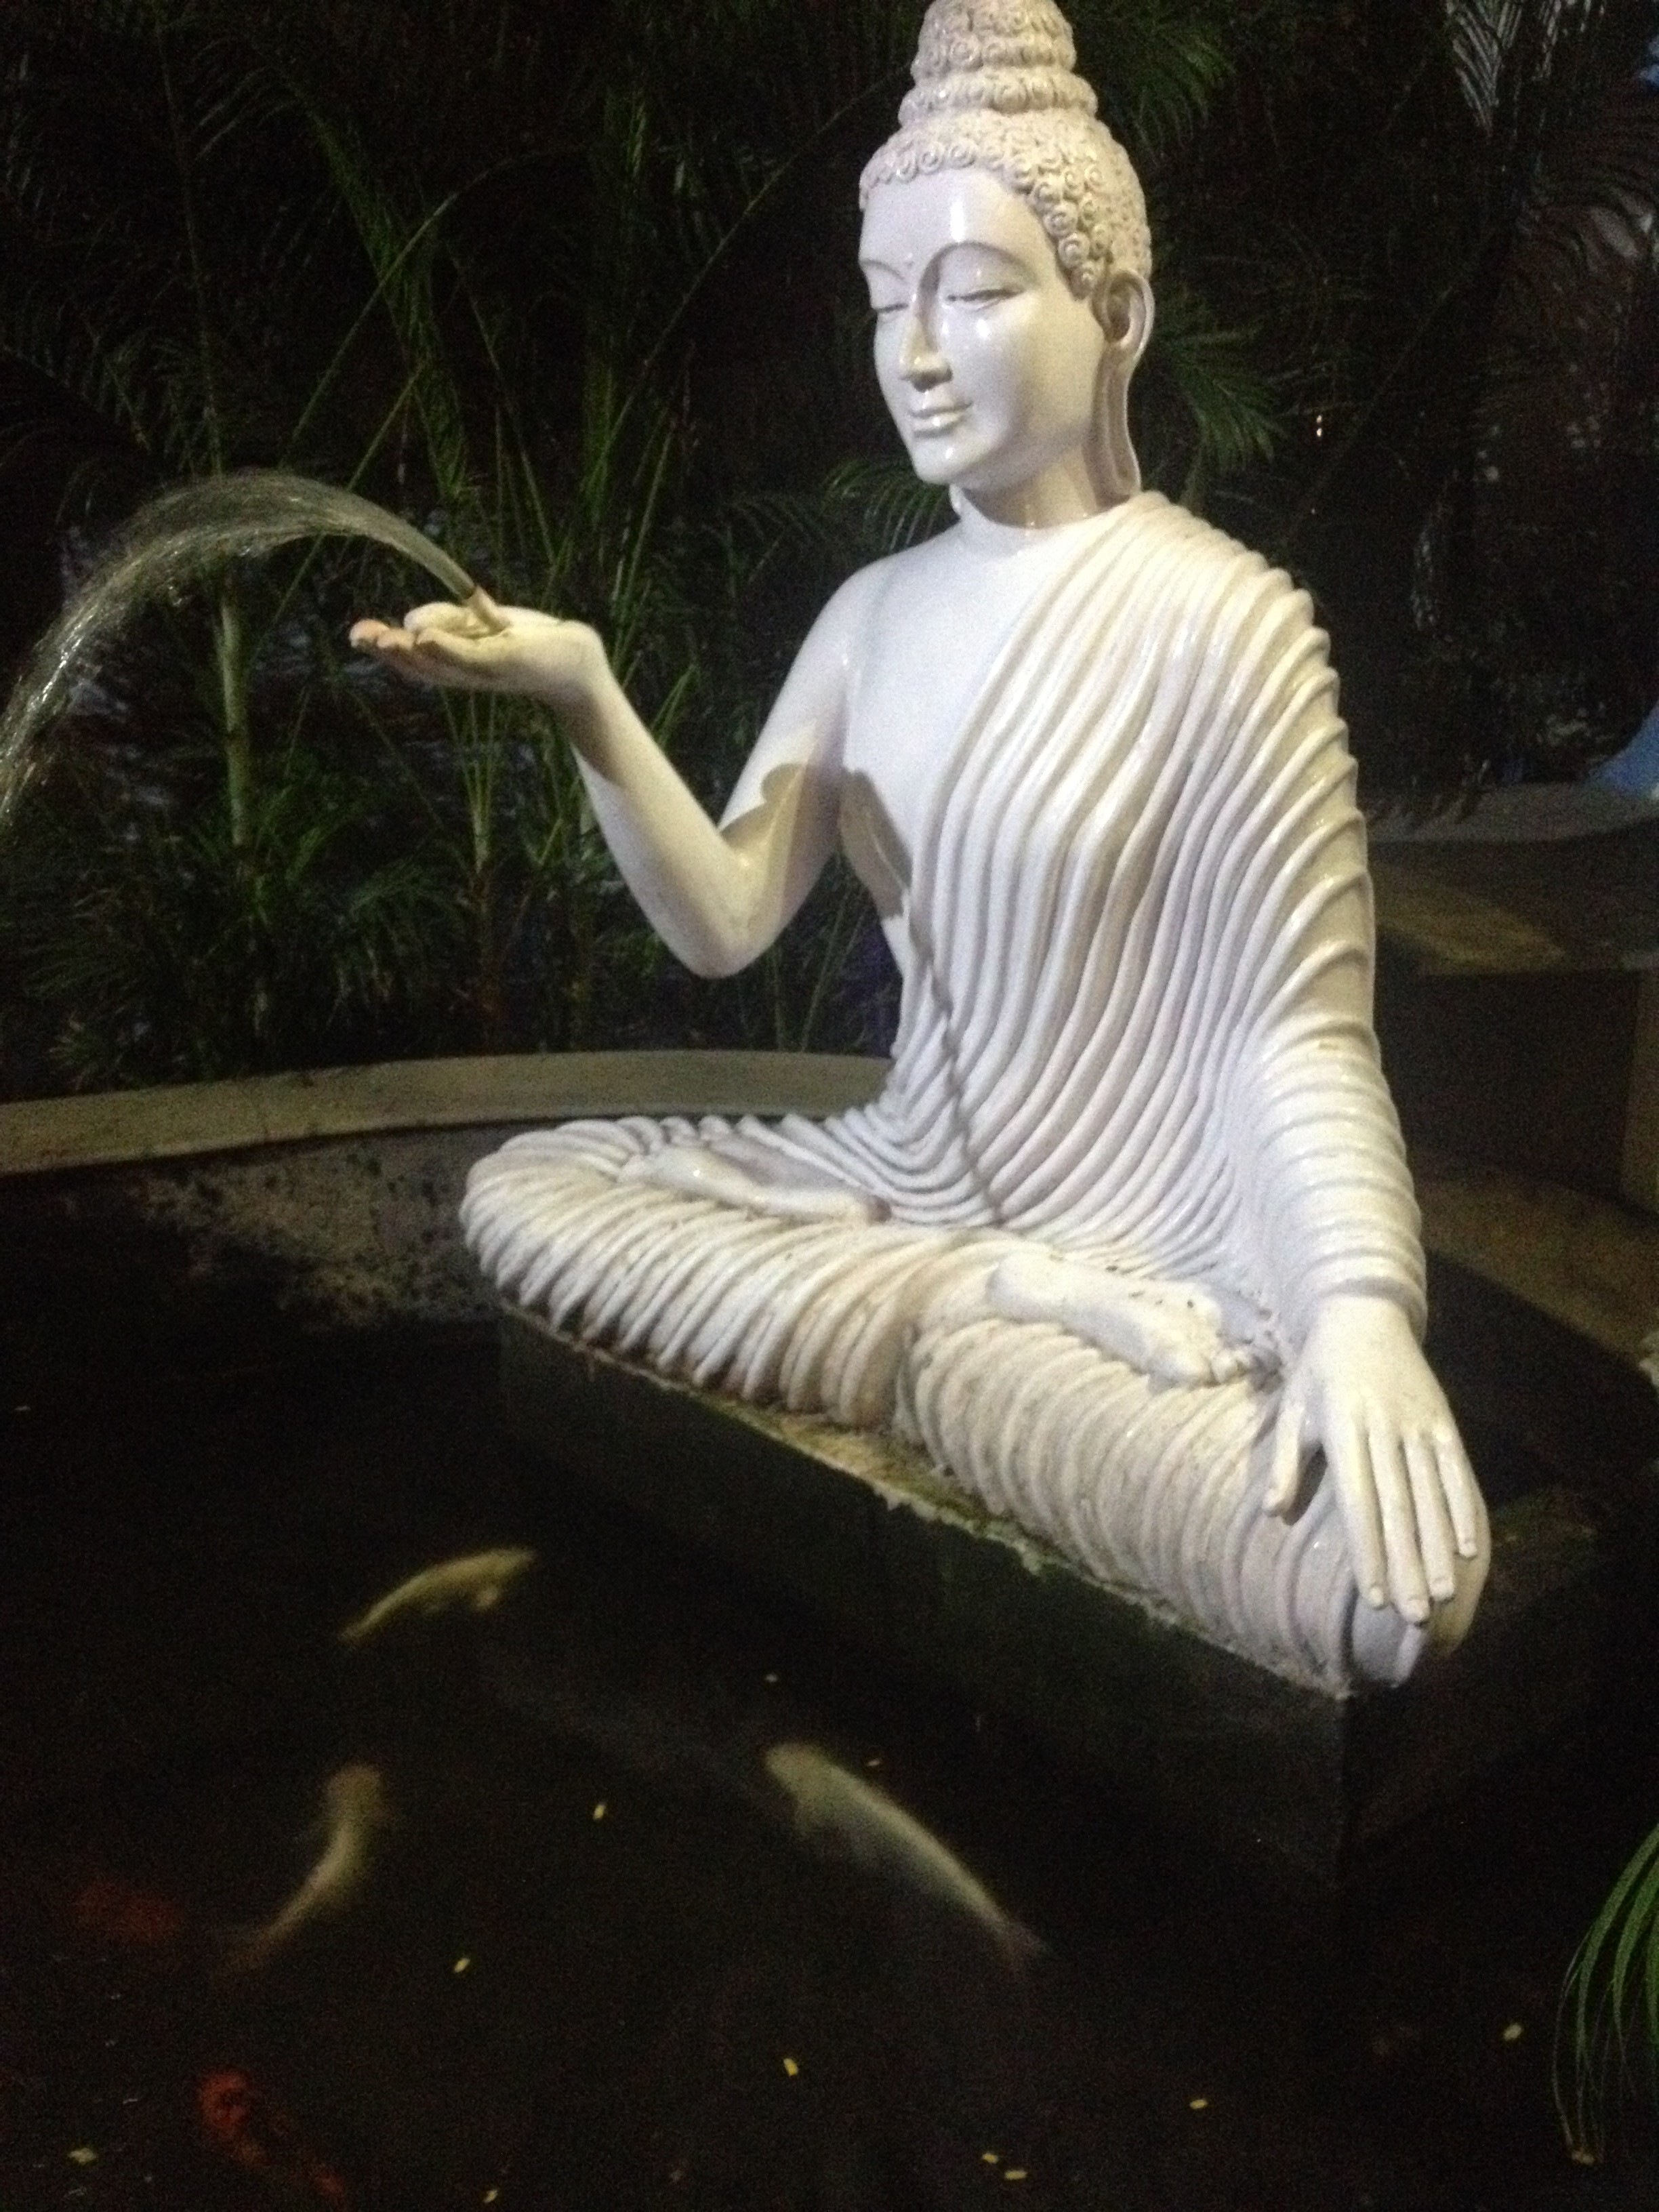 The zen starts outdoors. This Buddha statue welcomes visitors to Azzuri Bay